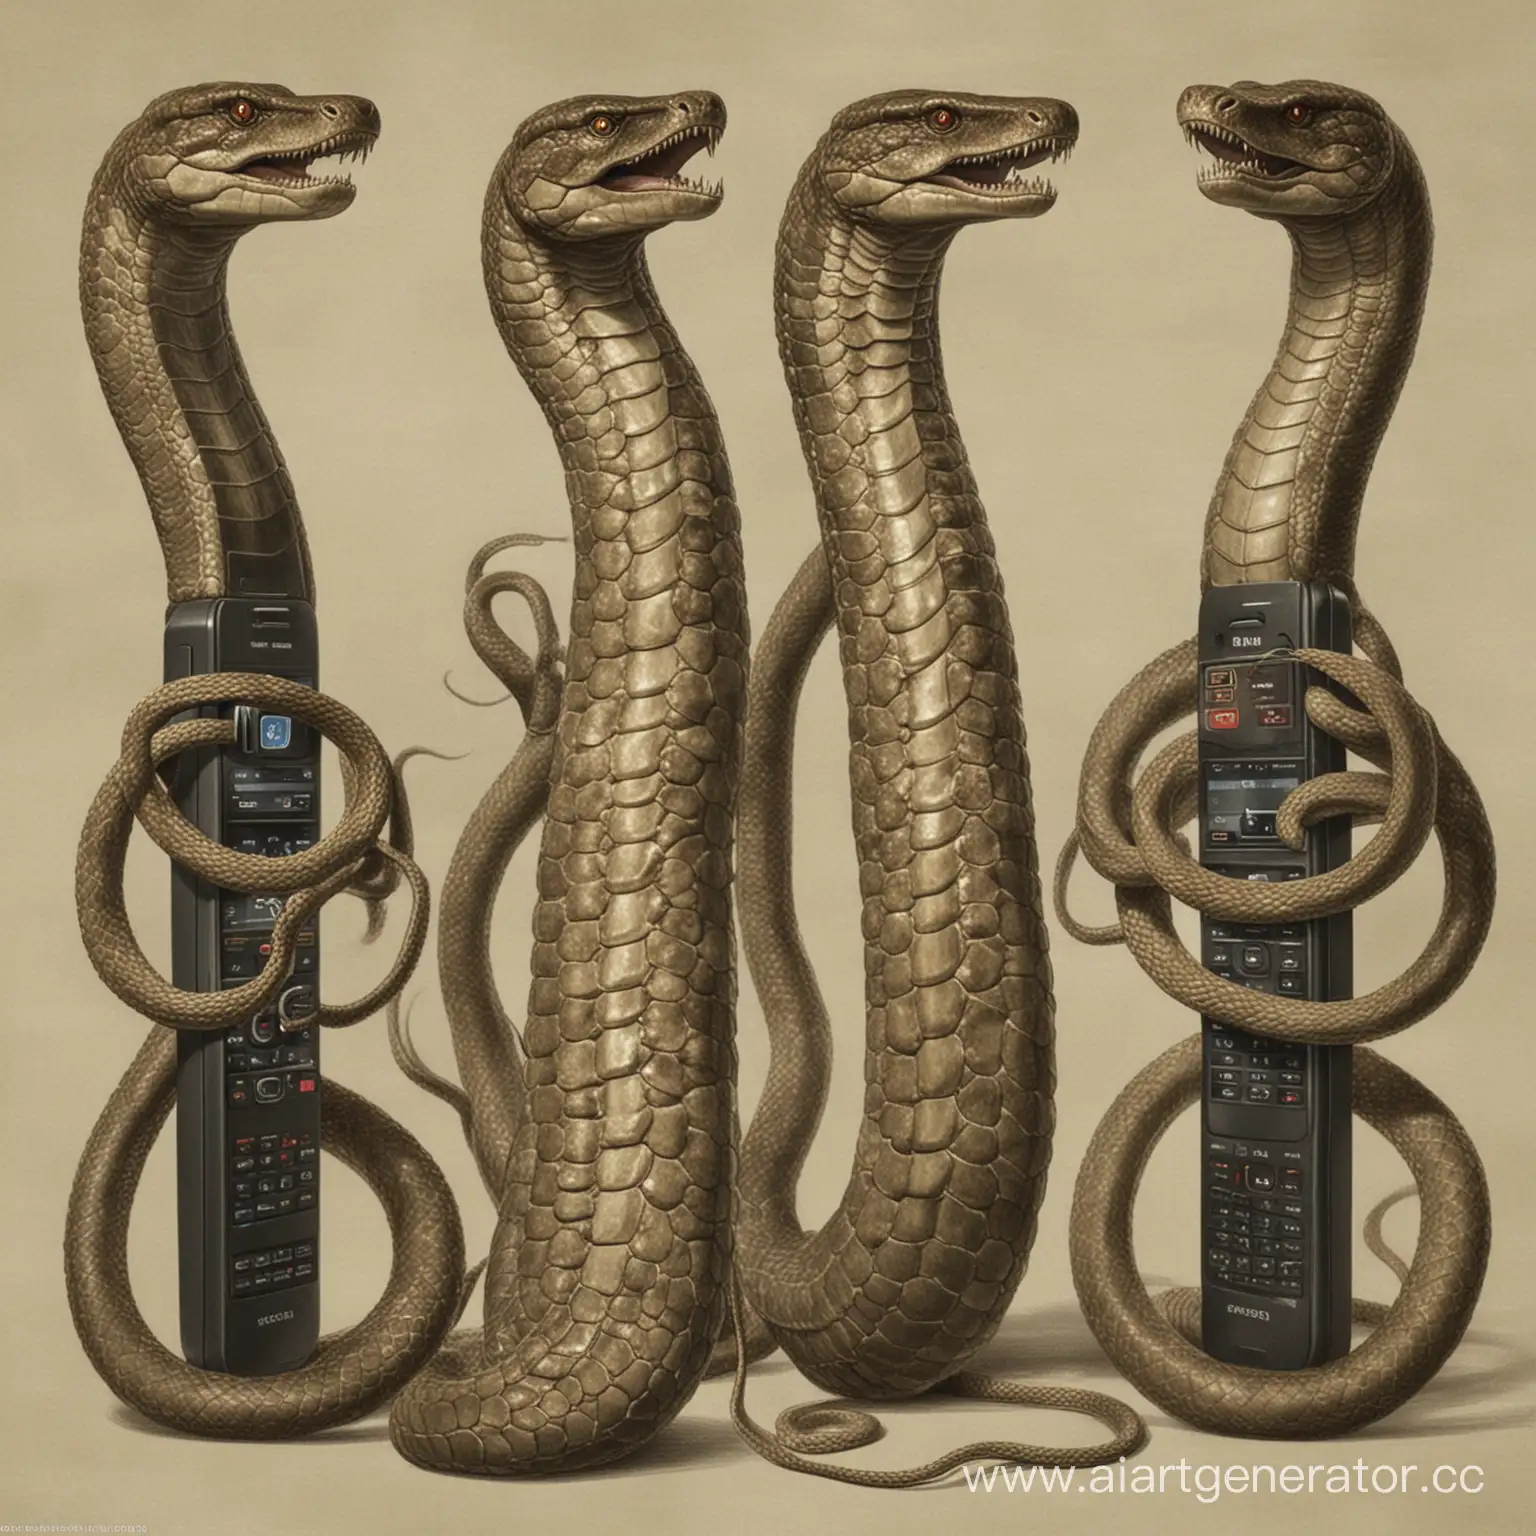 Hydra-with-Phones-Calling-Russia-A-Modern-Interpretation-of-Mythological-Creature